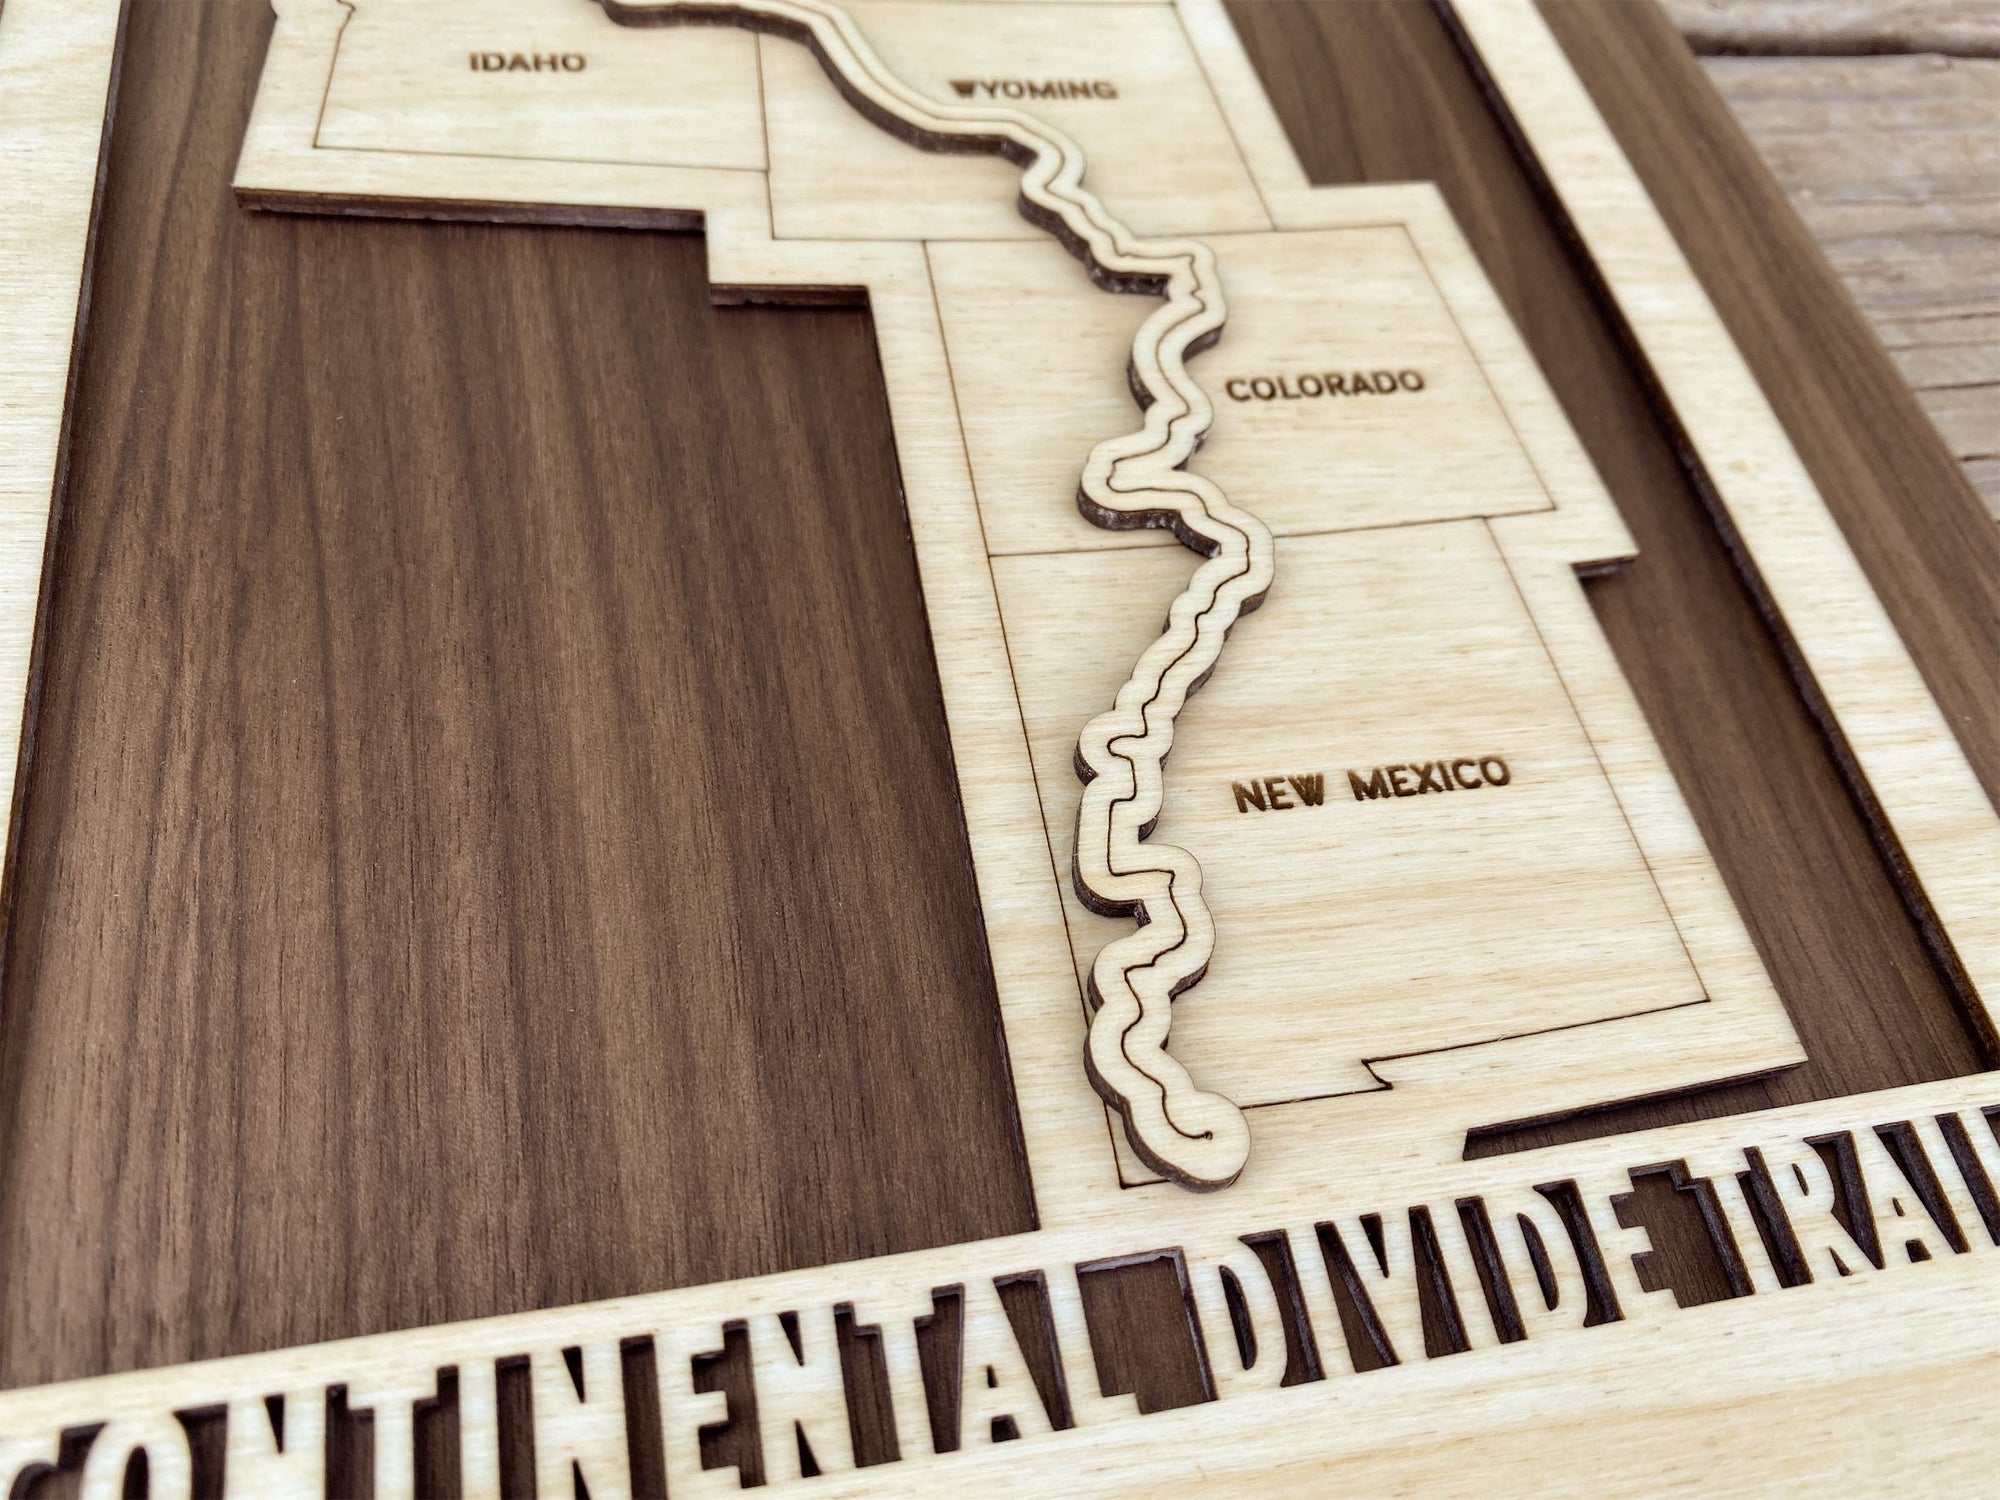 Continental Divide Trail Map - Wood cut map of CDT Gift for Hikers